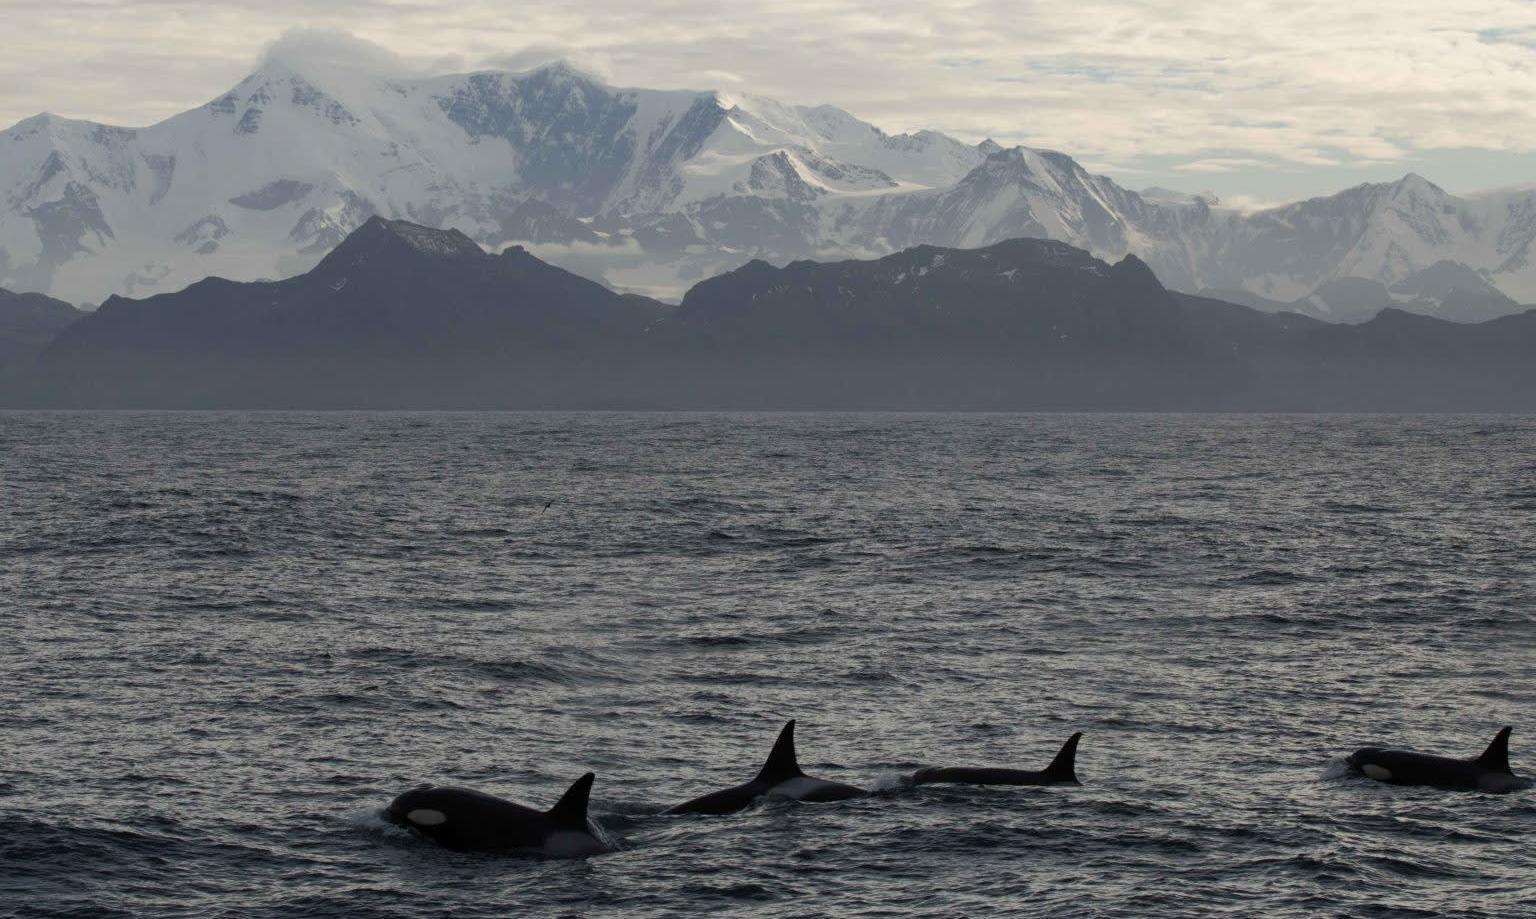 South Georgia hosts large numbers of whales, seals, and penguins.  (Image: Martin Collins/2020 South Georgia right whale project)